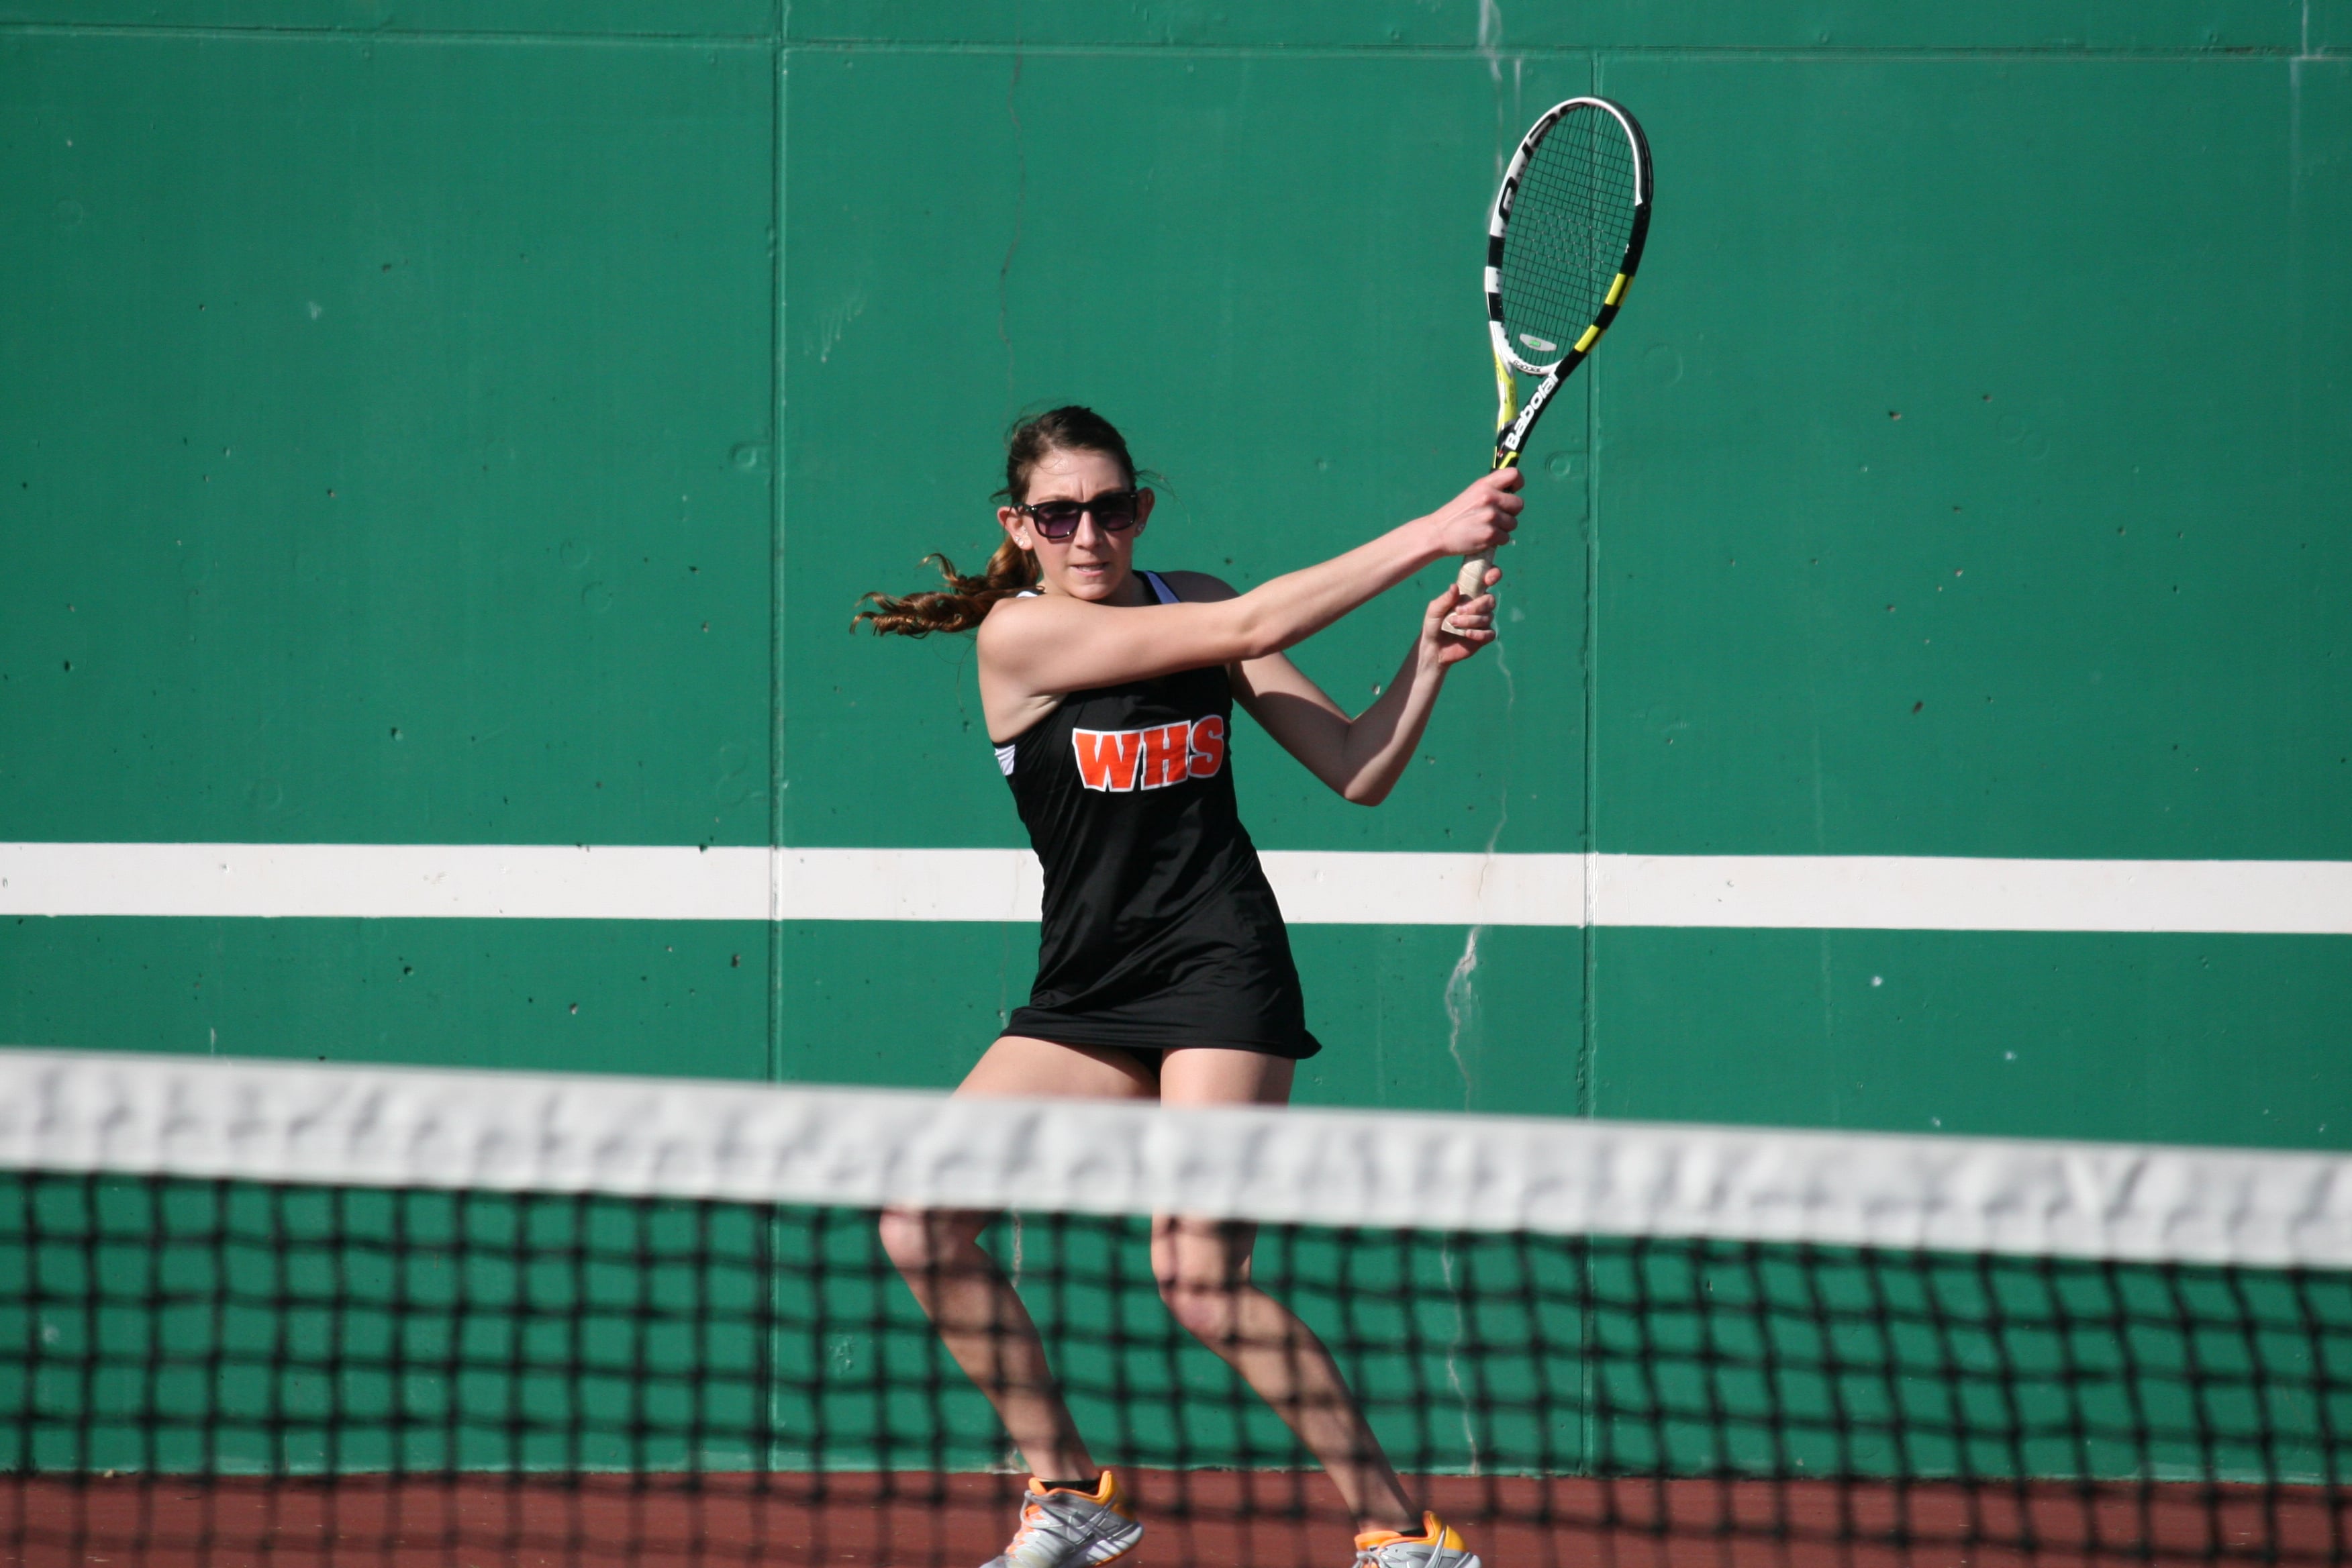 Haley Briggs nails a forehand.